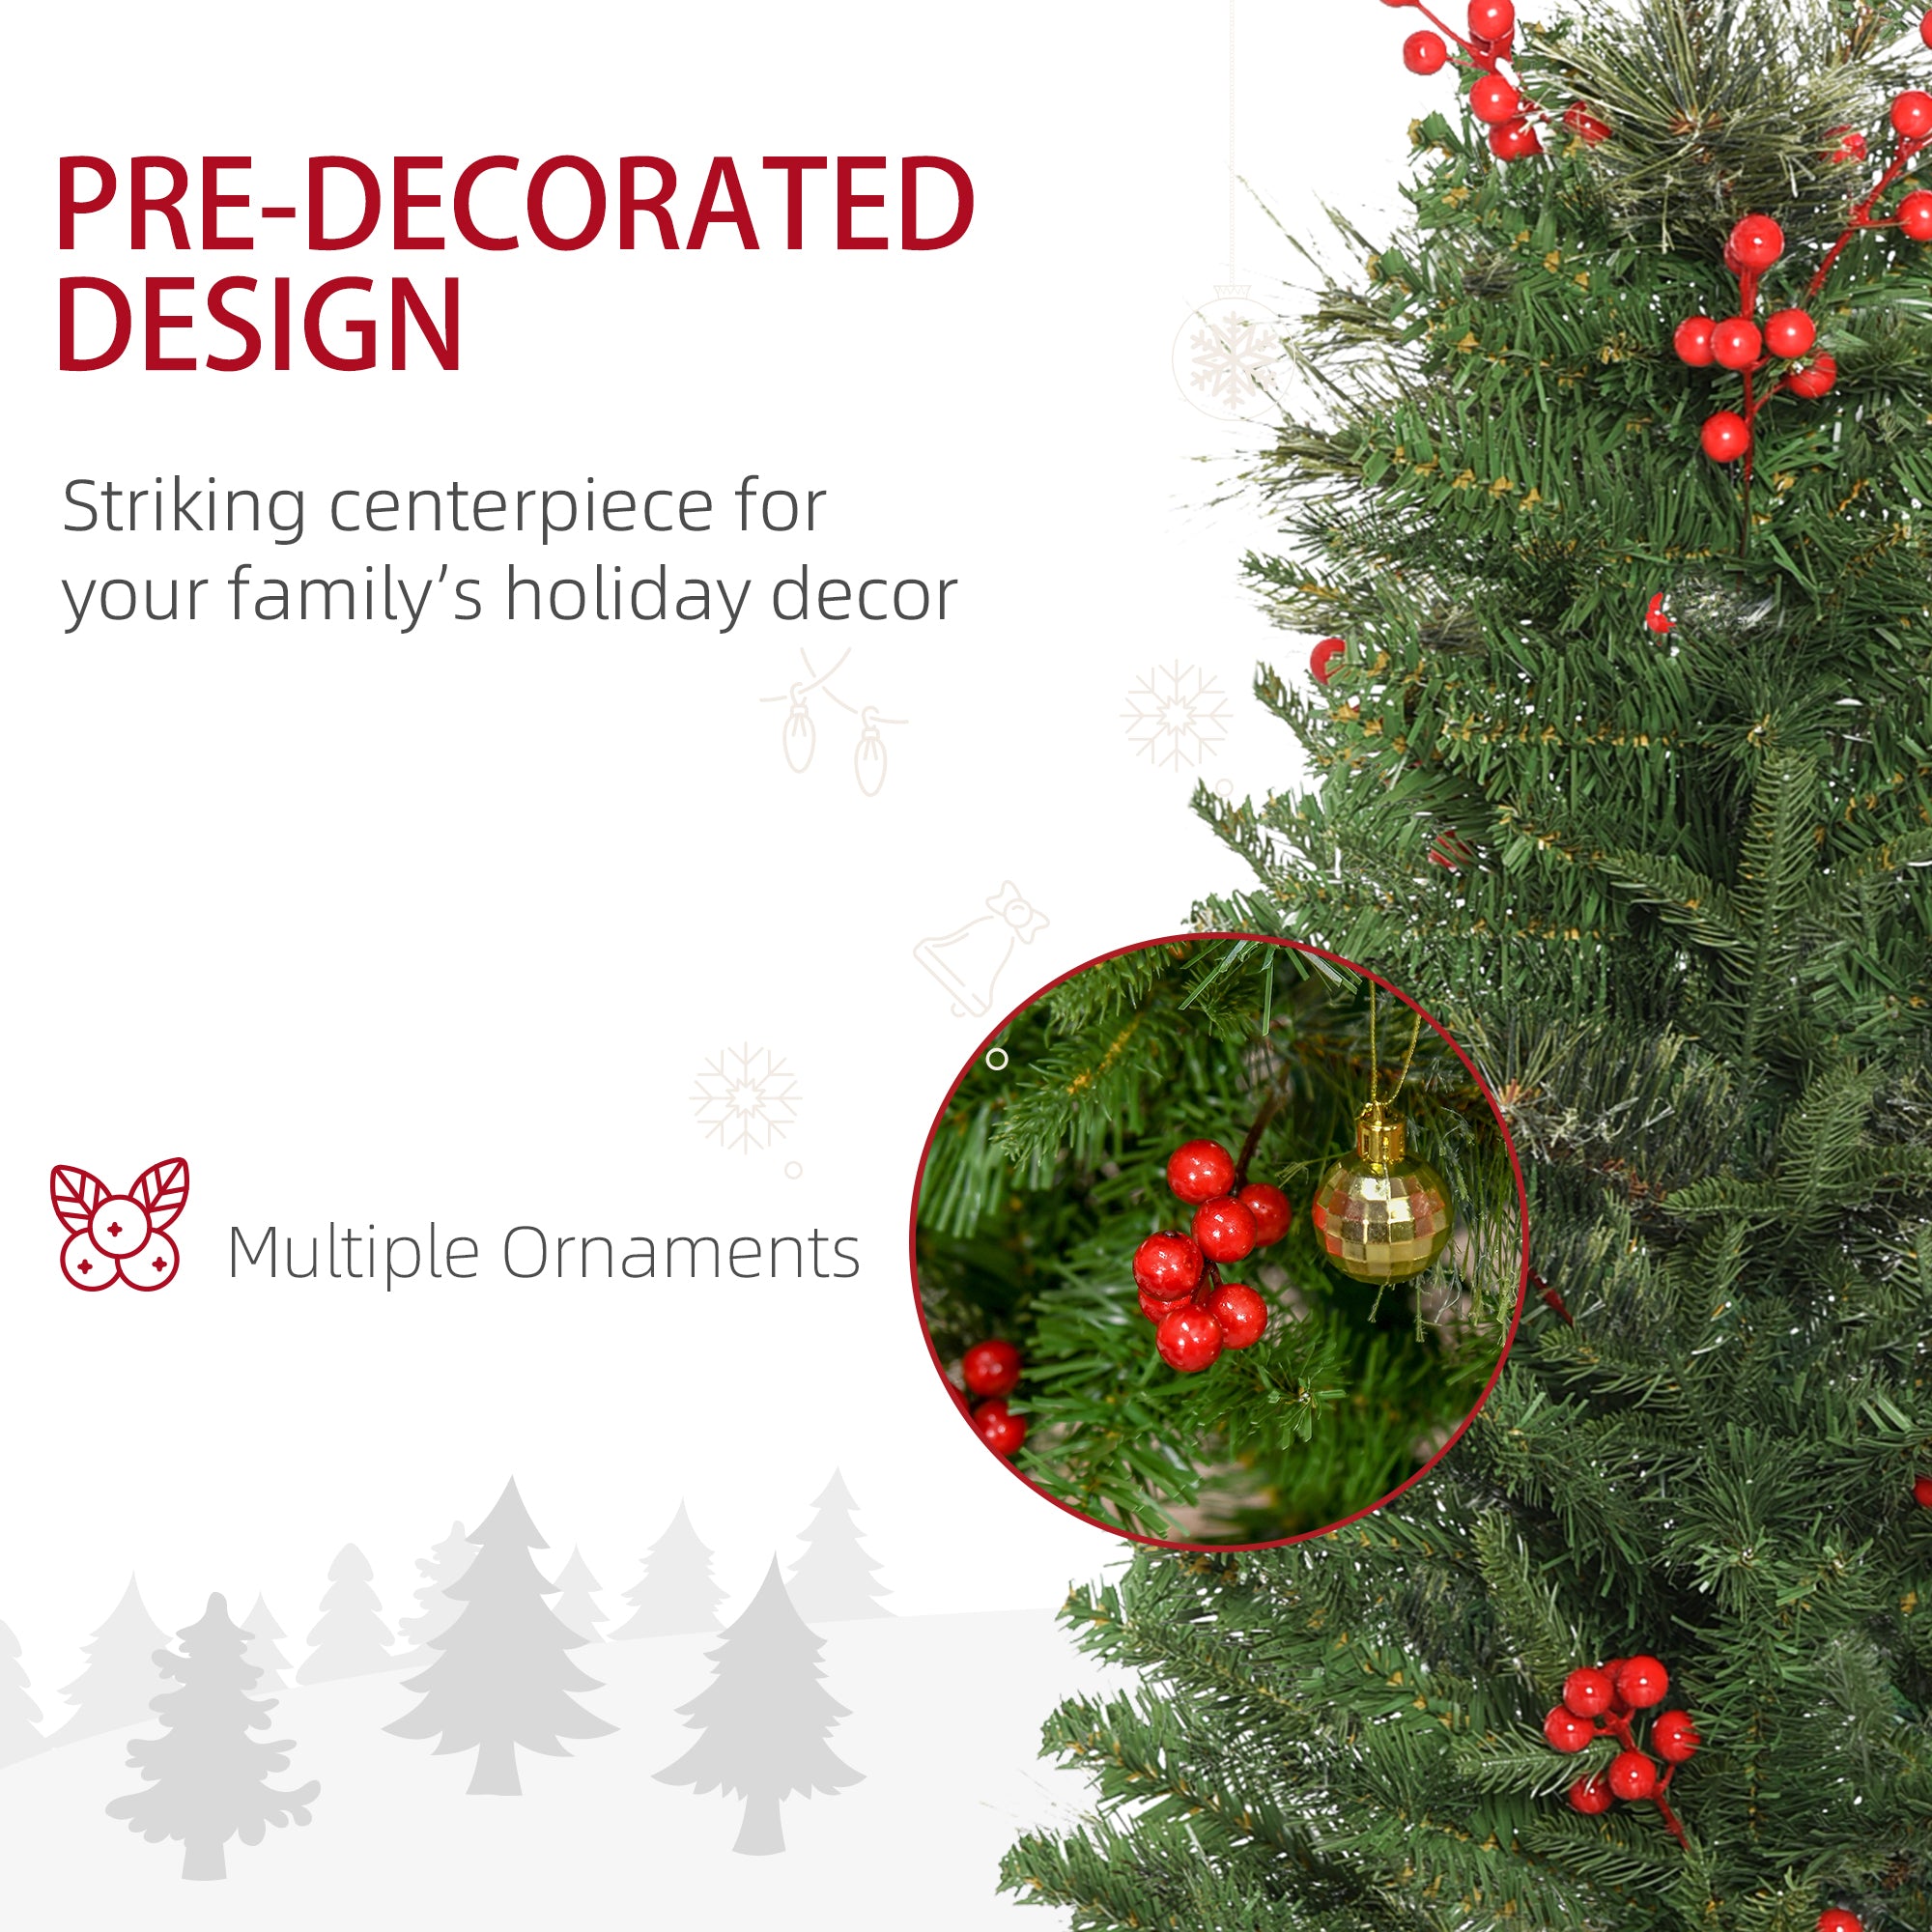 HOMCOM Pencil Artificial Christmas Tree with Realistic Branches, Red Berries, Auto Open, Green